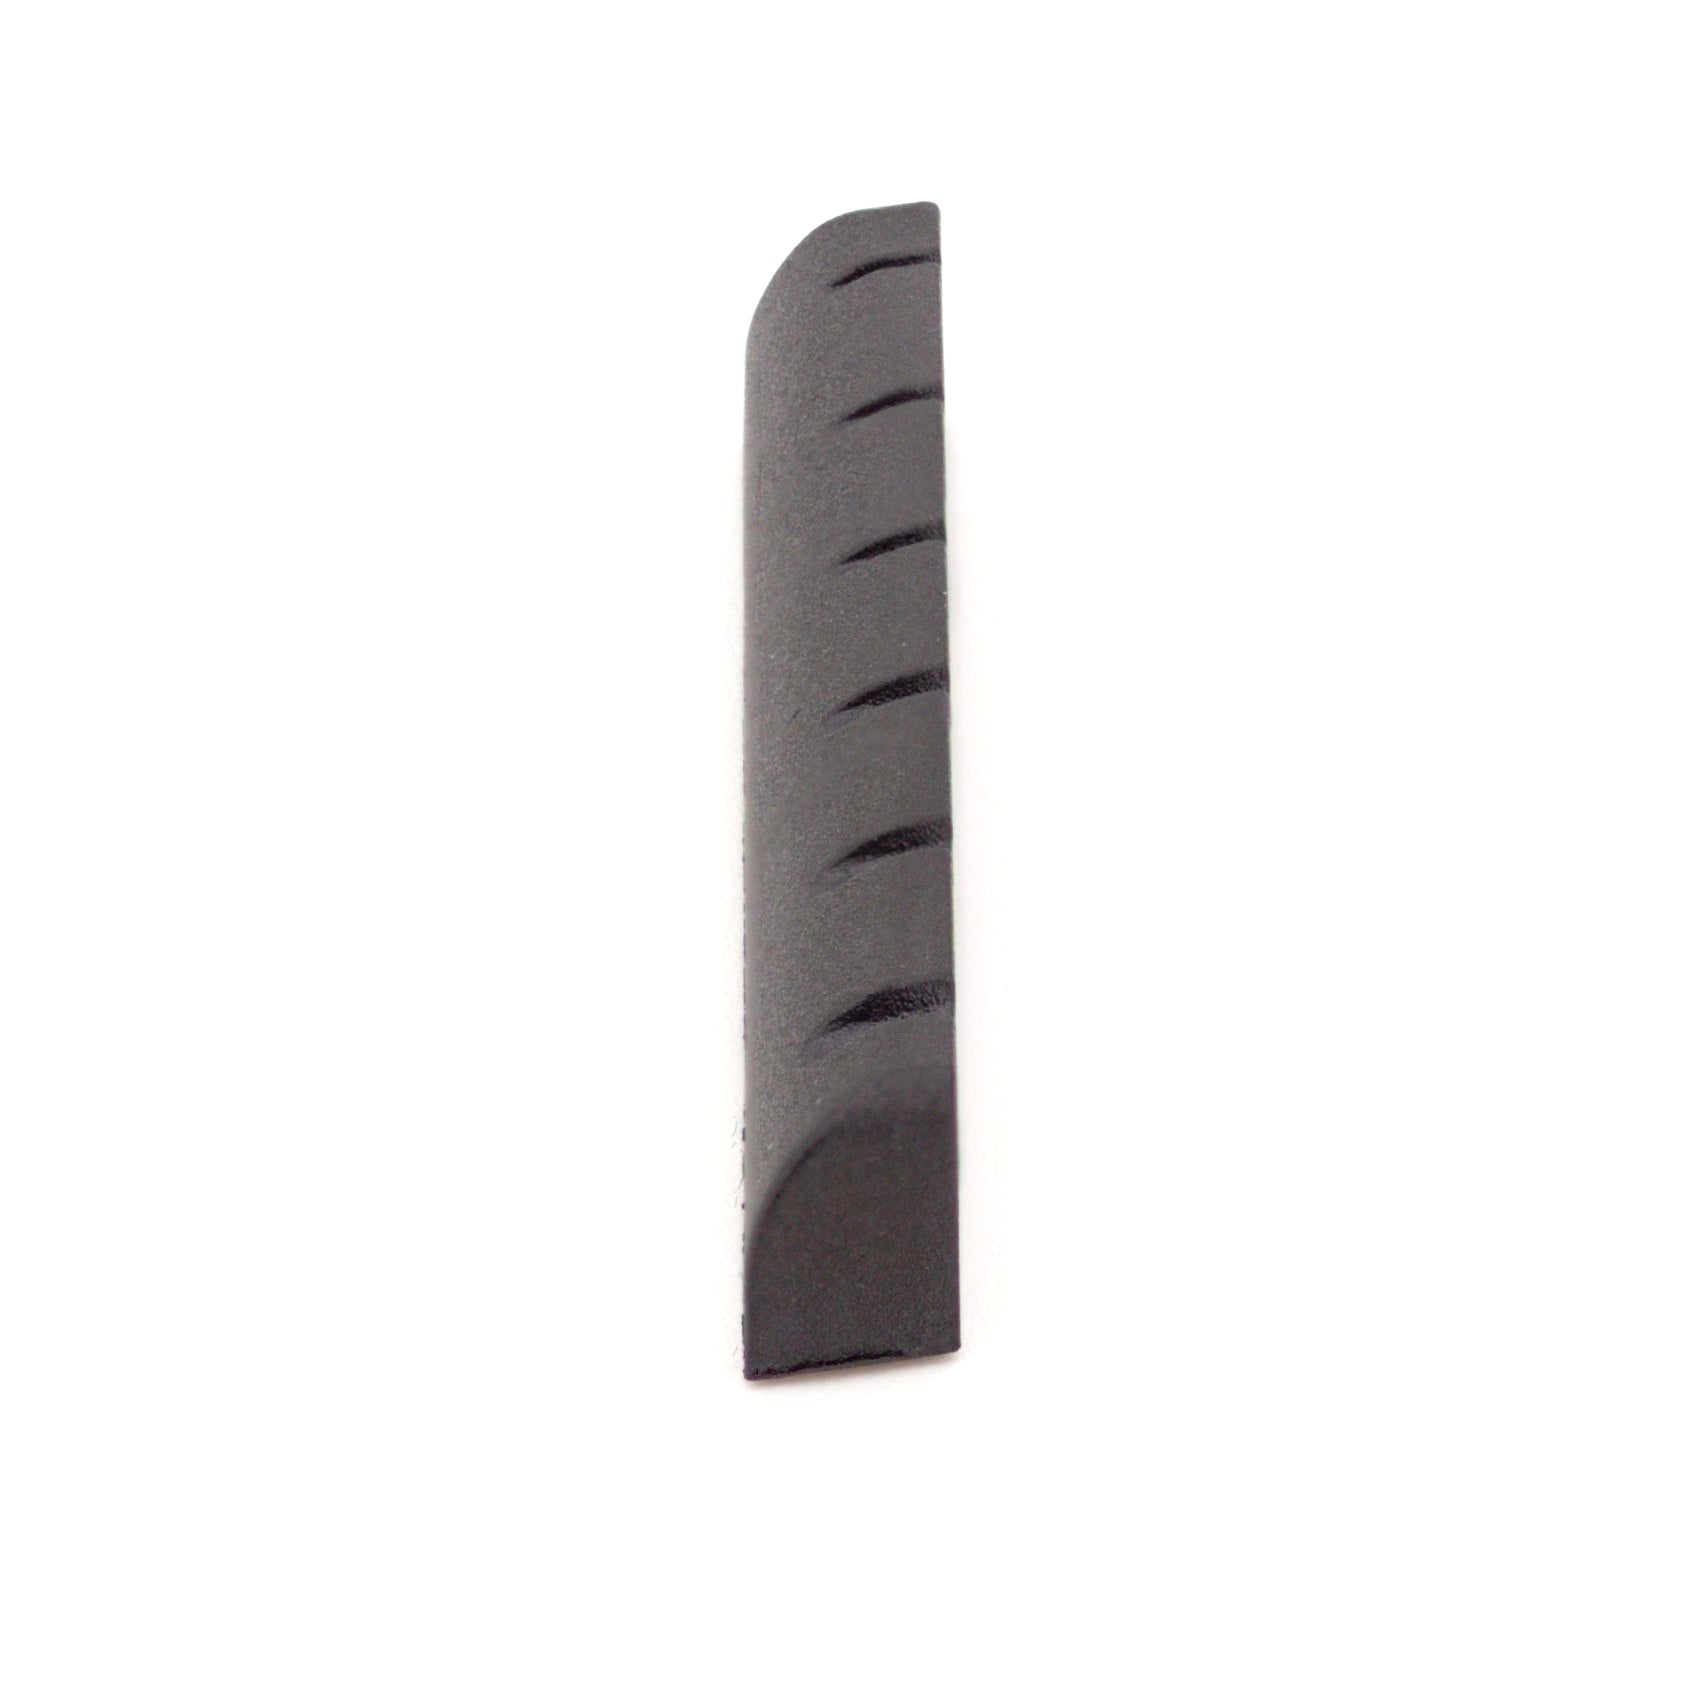 Model 6649-00 Nut Slotted Multi-Scale L45.97mm